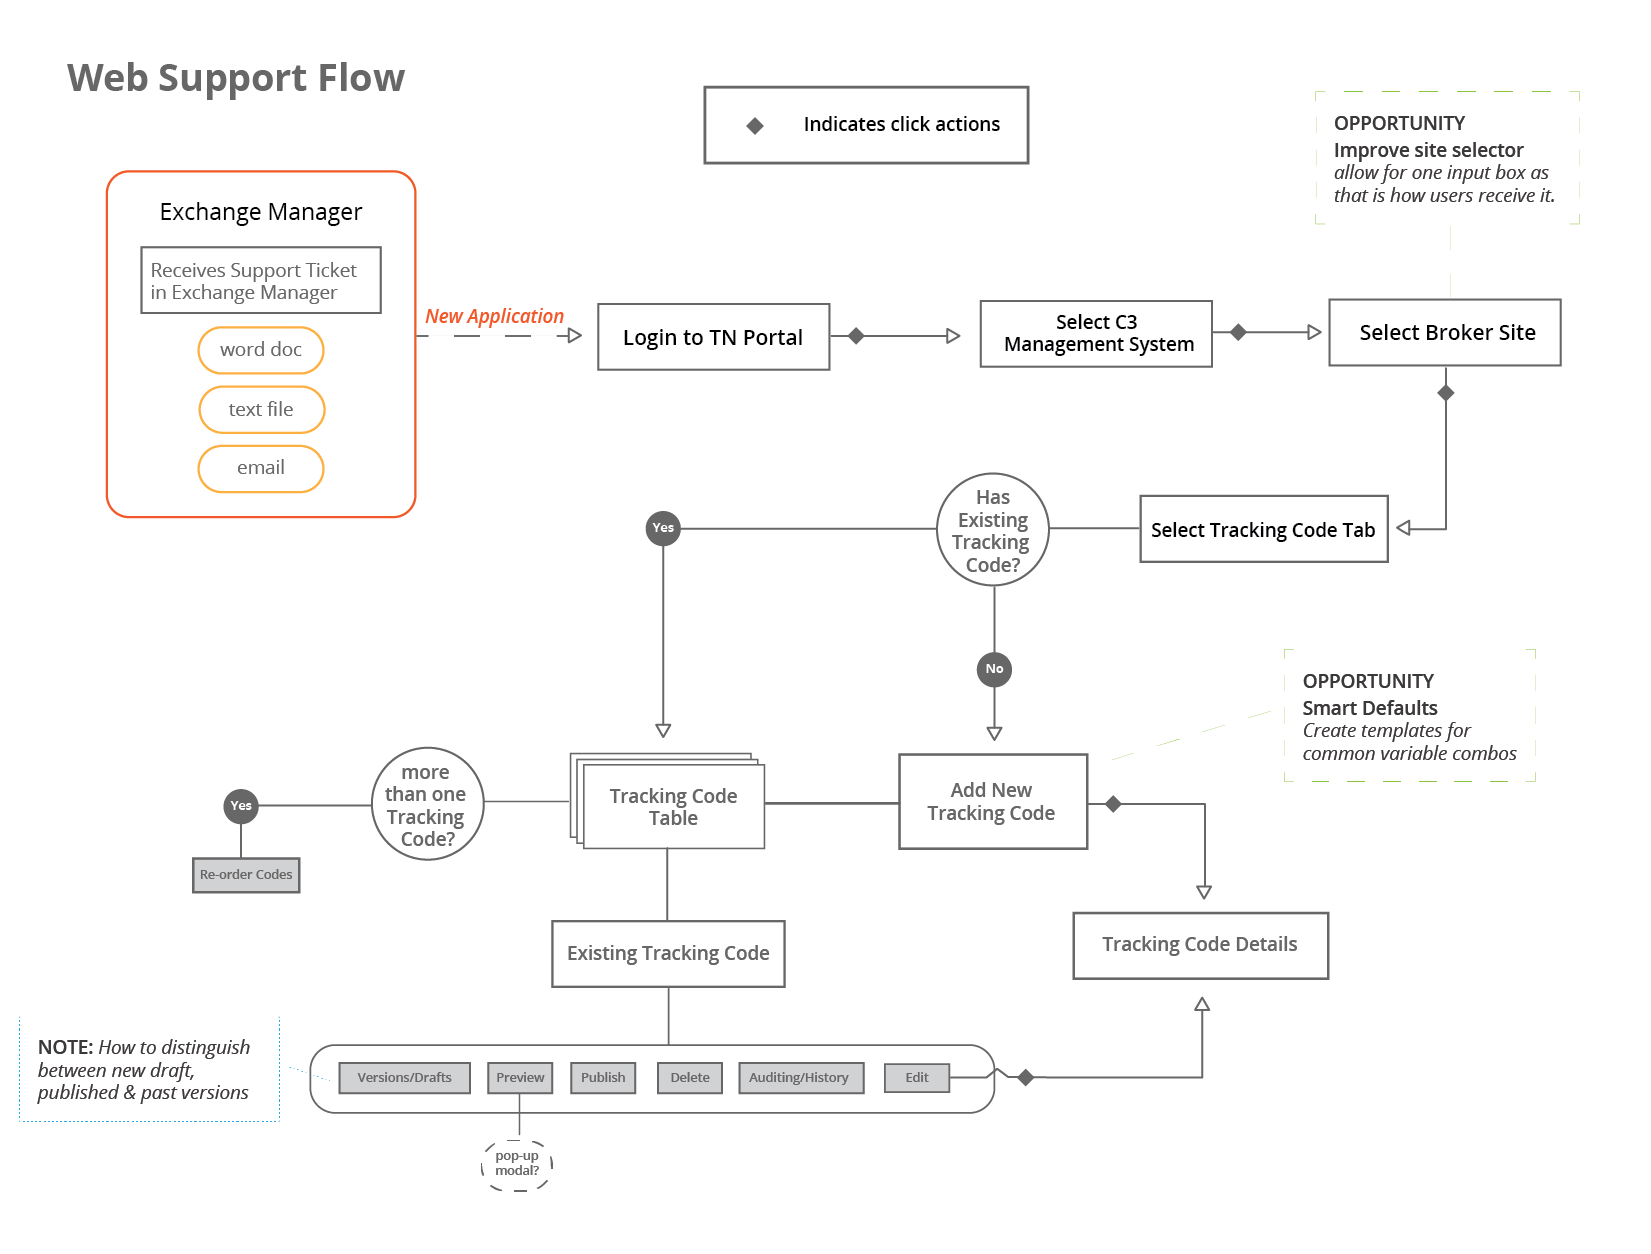 Web Support Engineer Flow